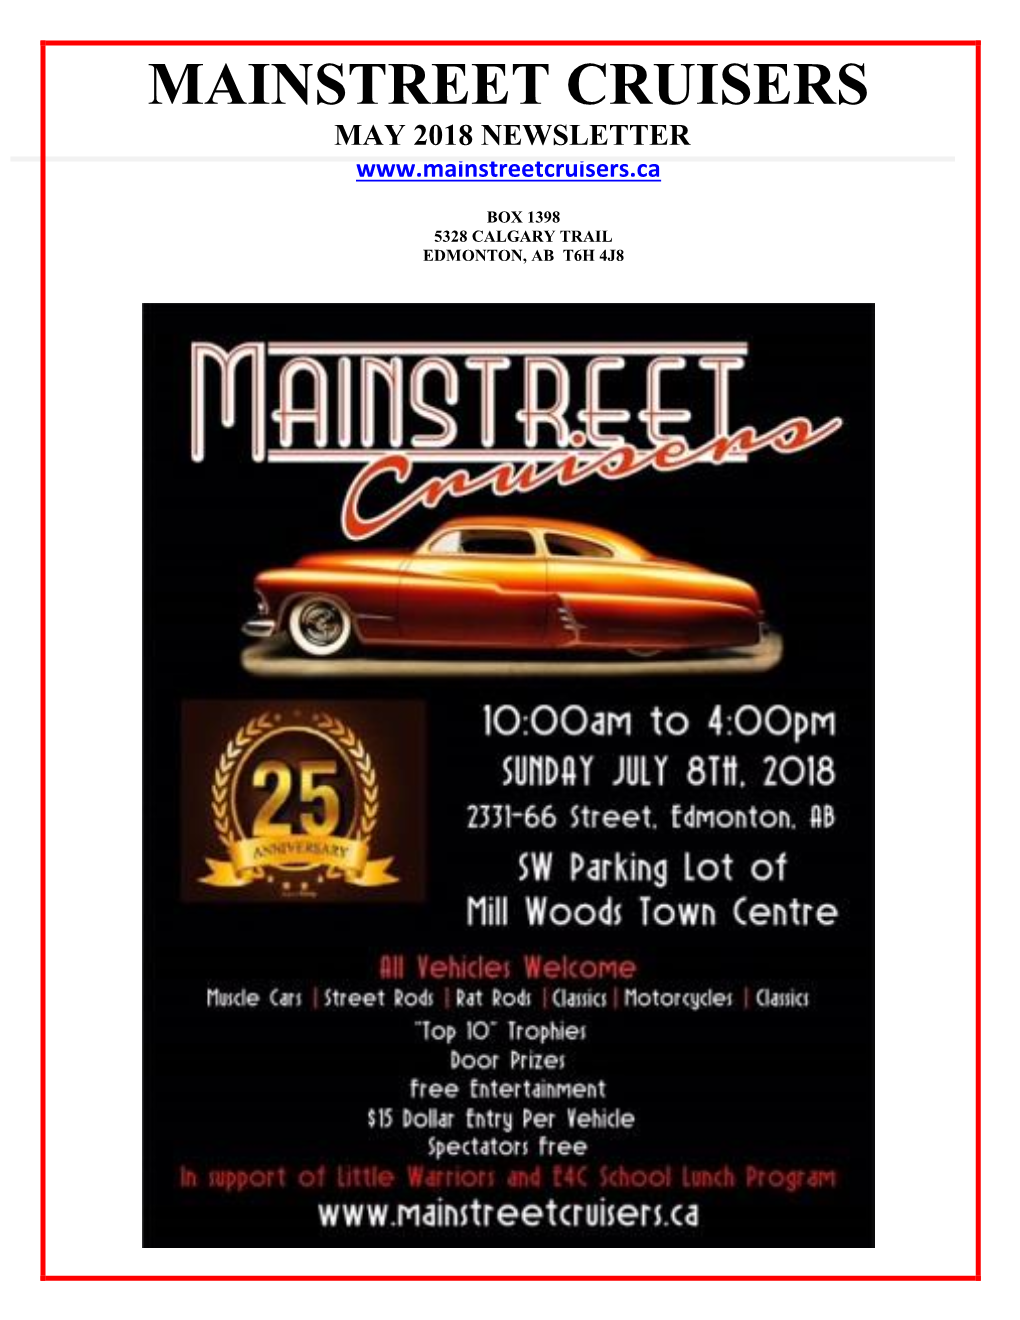 MAINSTREET CRUISERS SPONSORS the Following Businesses Are Our Club Sponsors